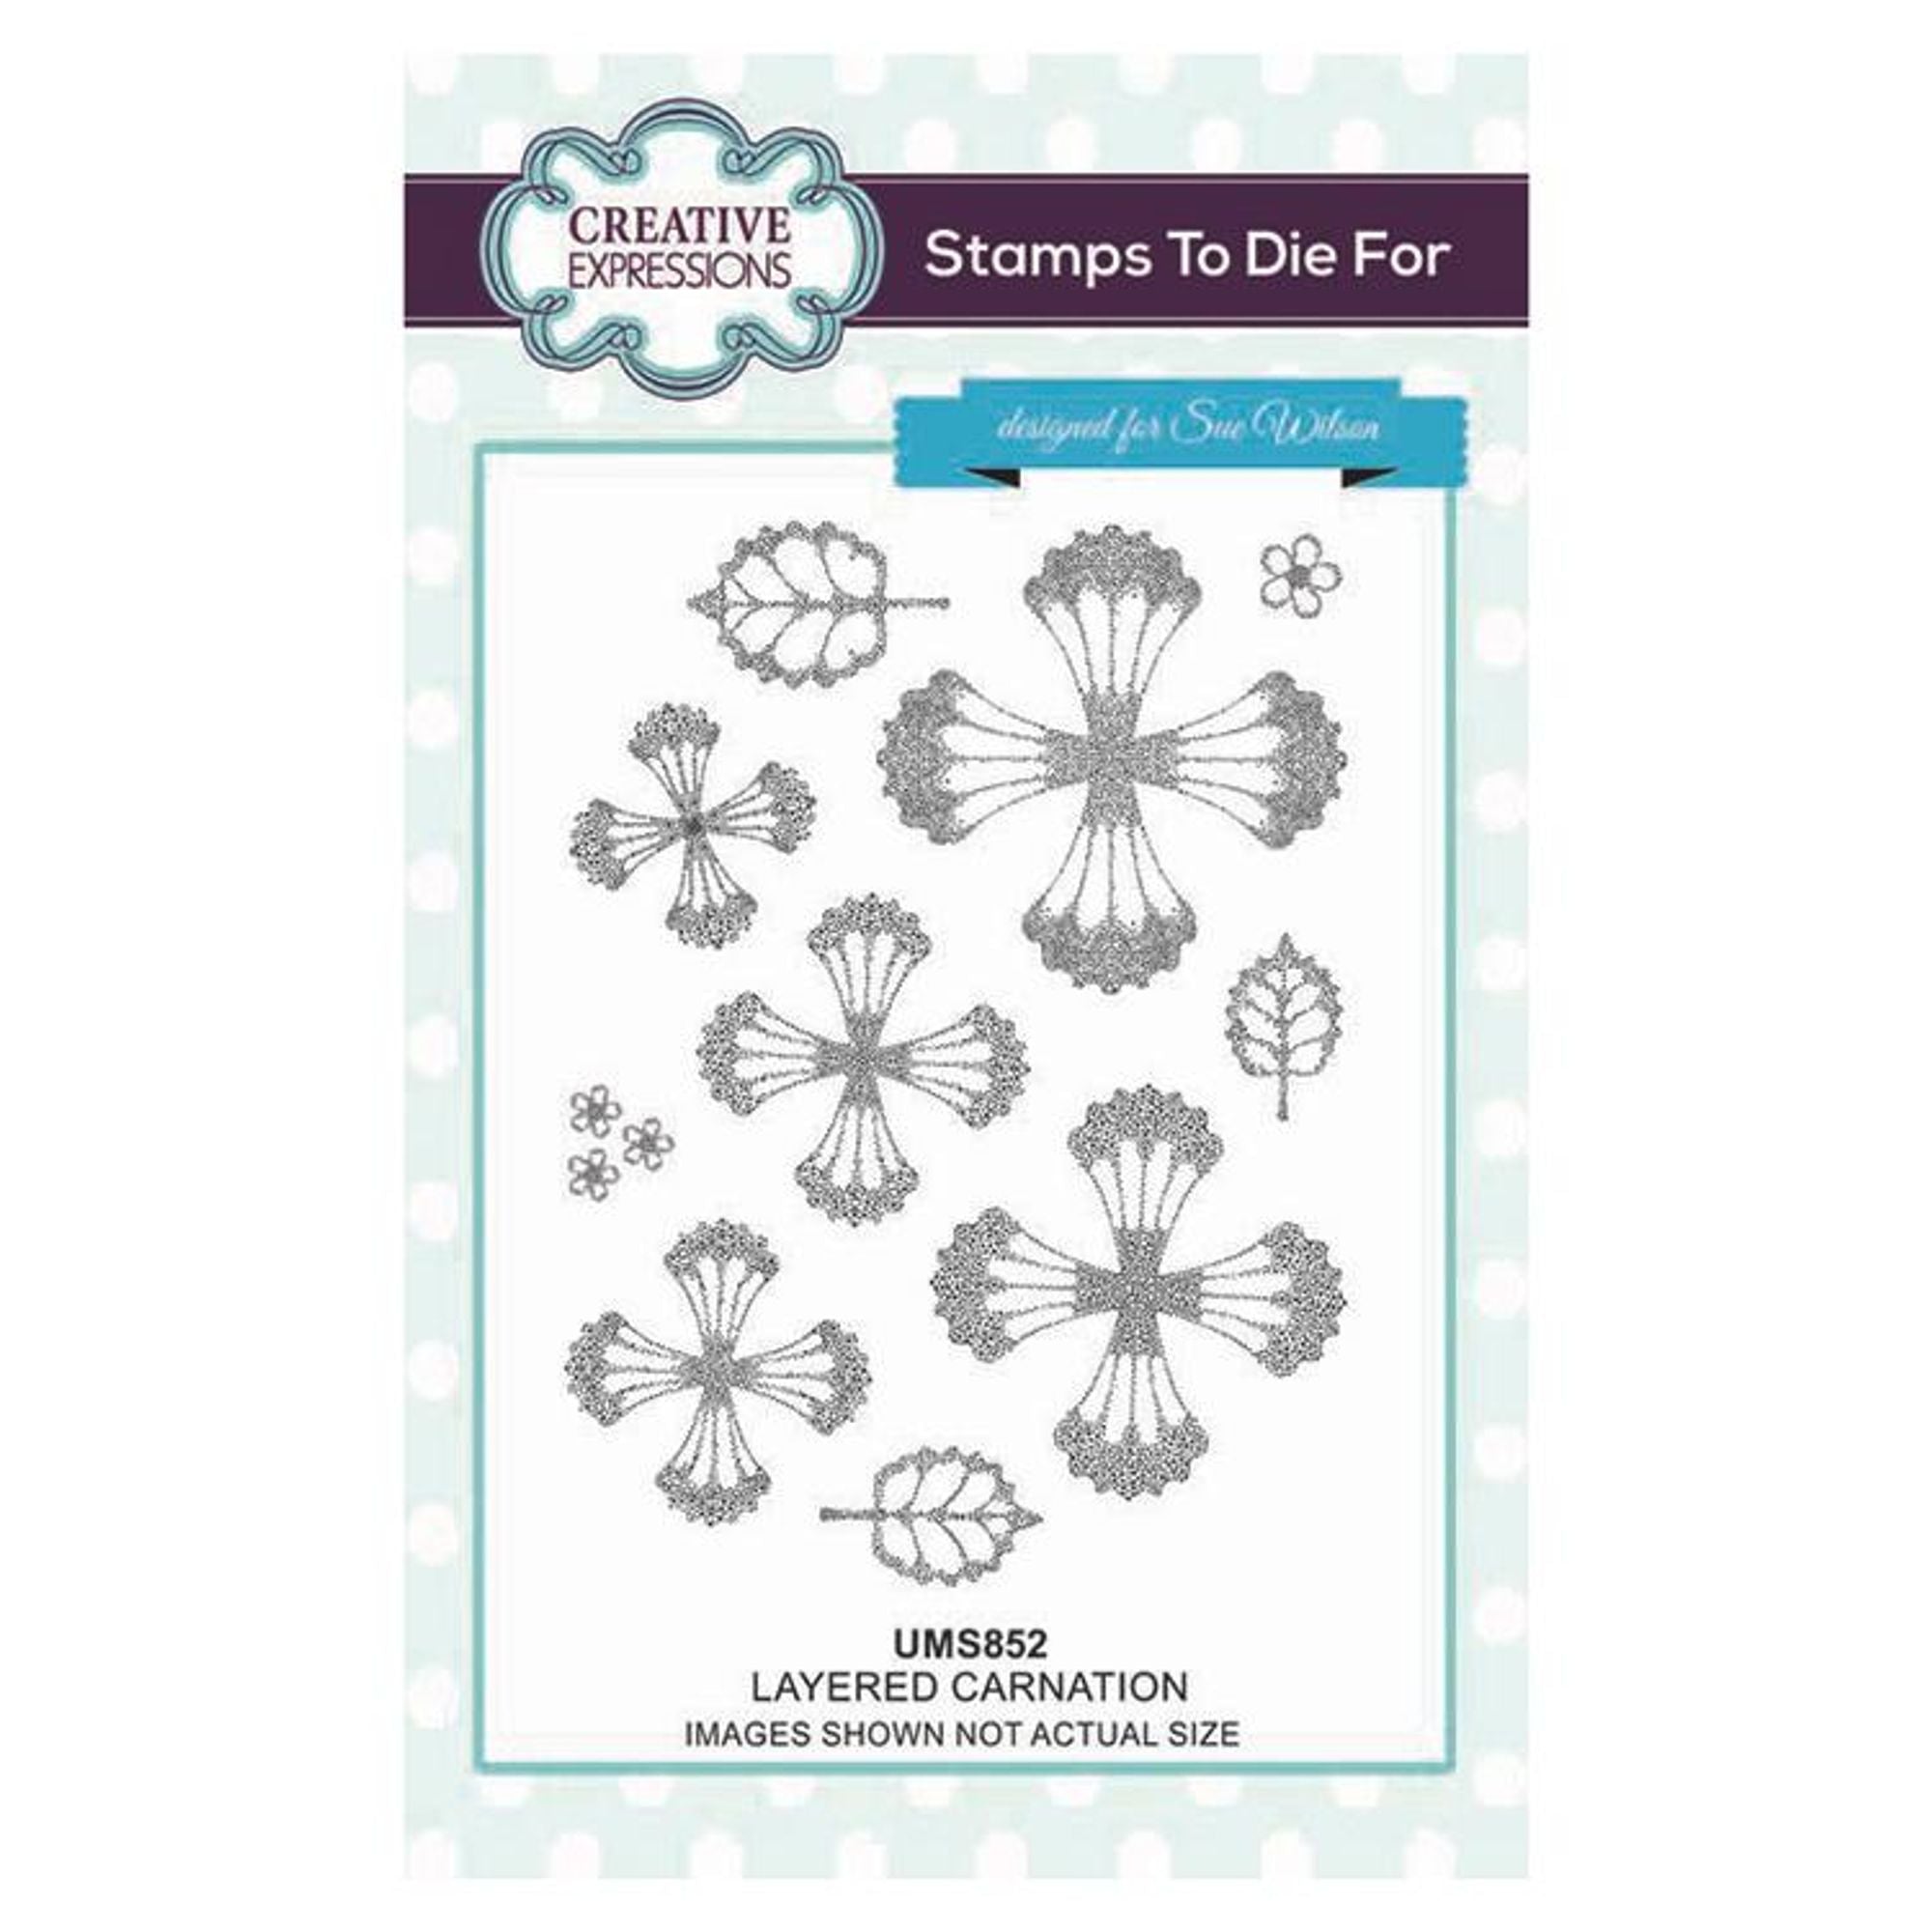 Creative Expressions Layered Carnation Pre-Cut Stamp Set